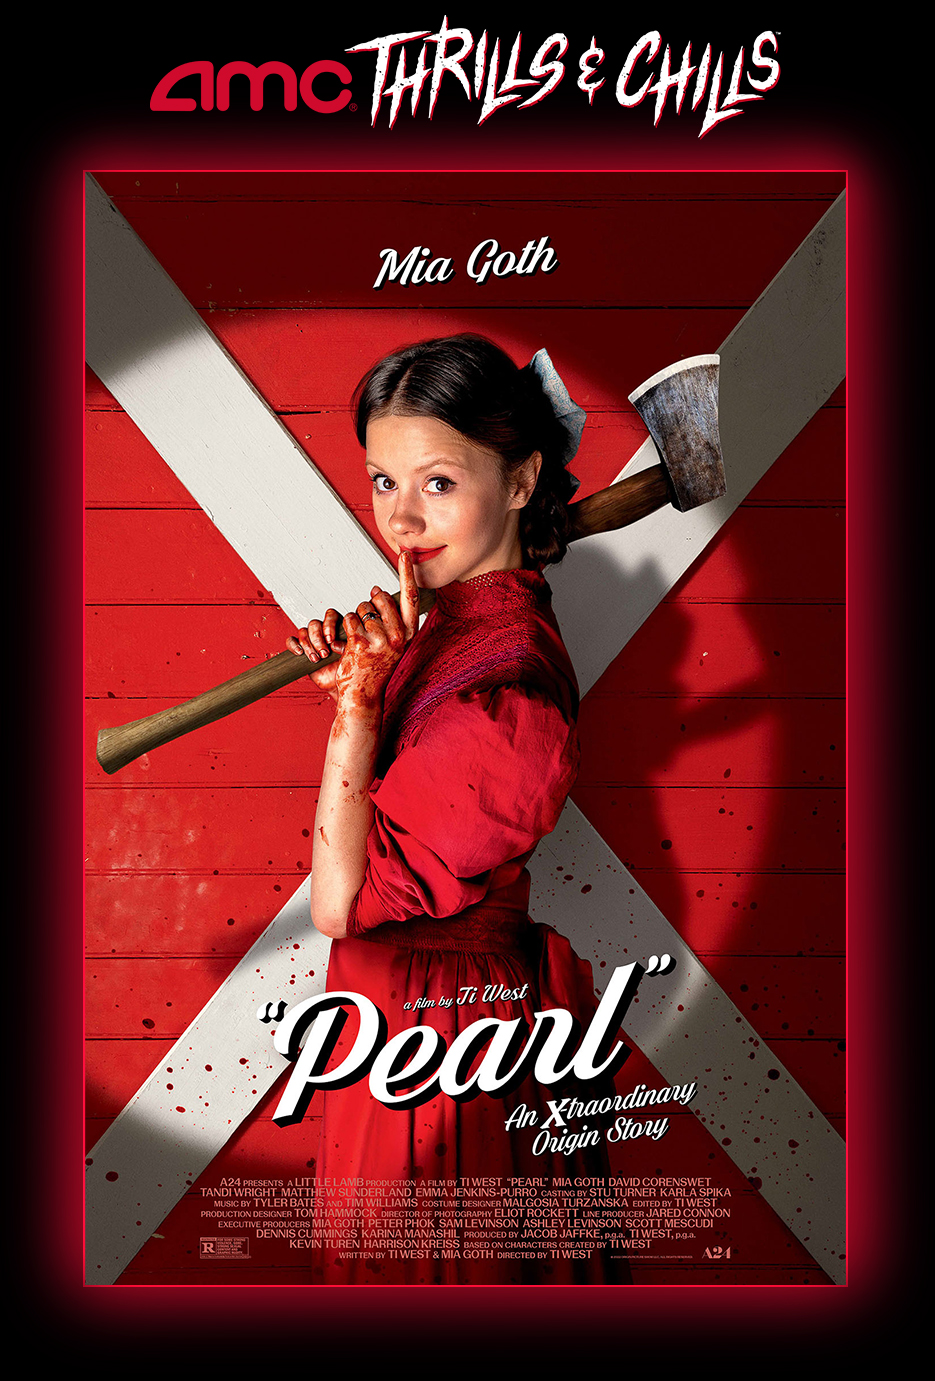 Pearl + X Double Feature at an AMC Theatre near you